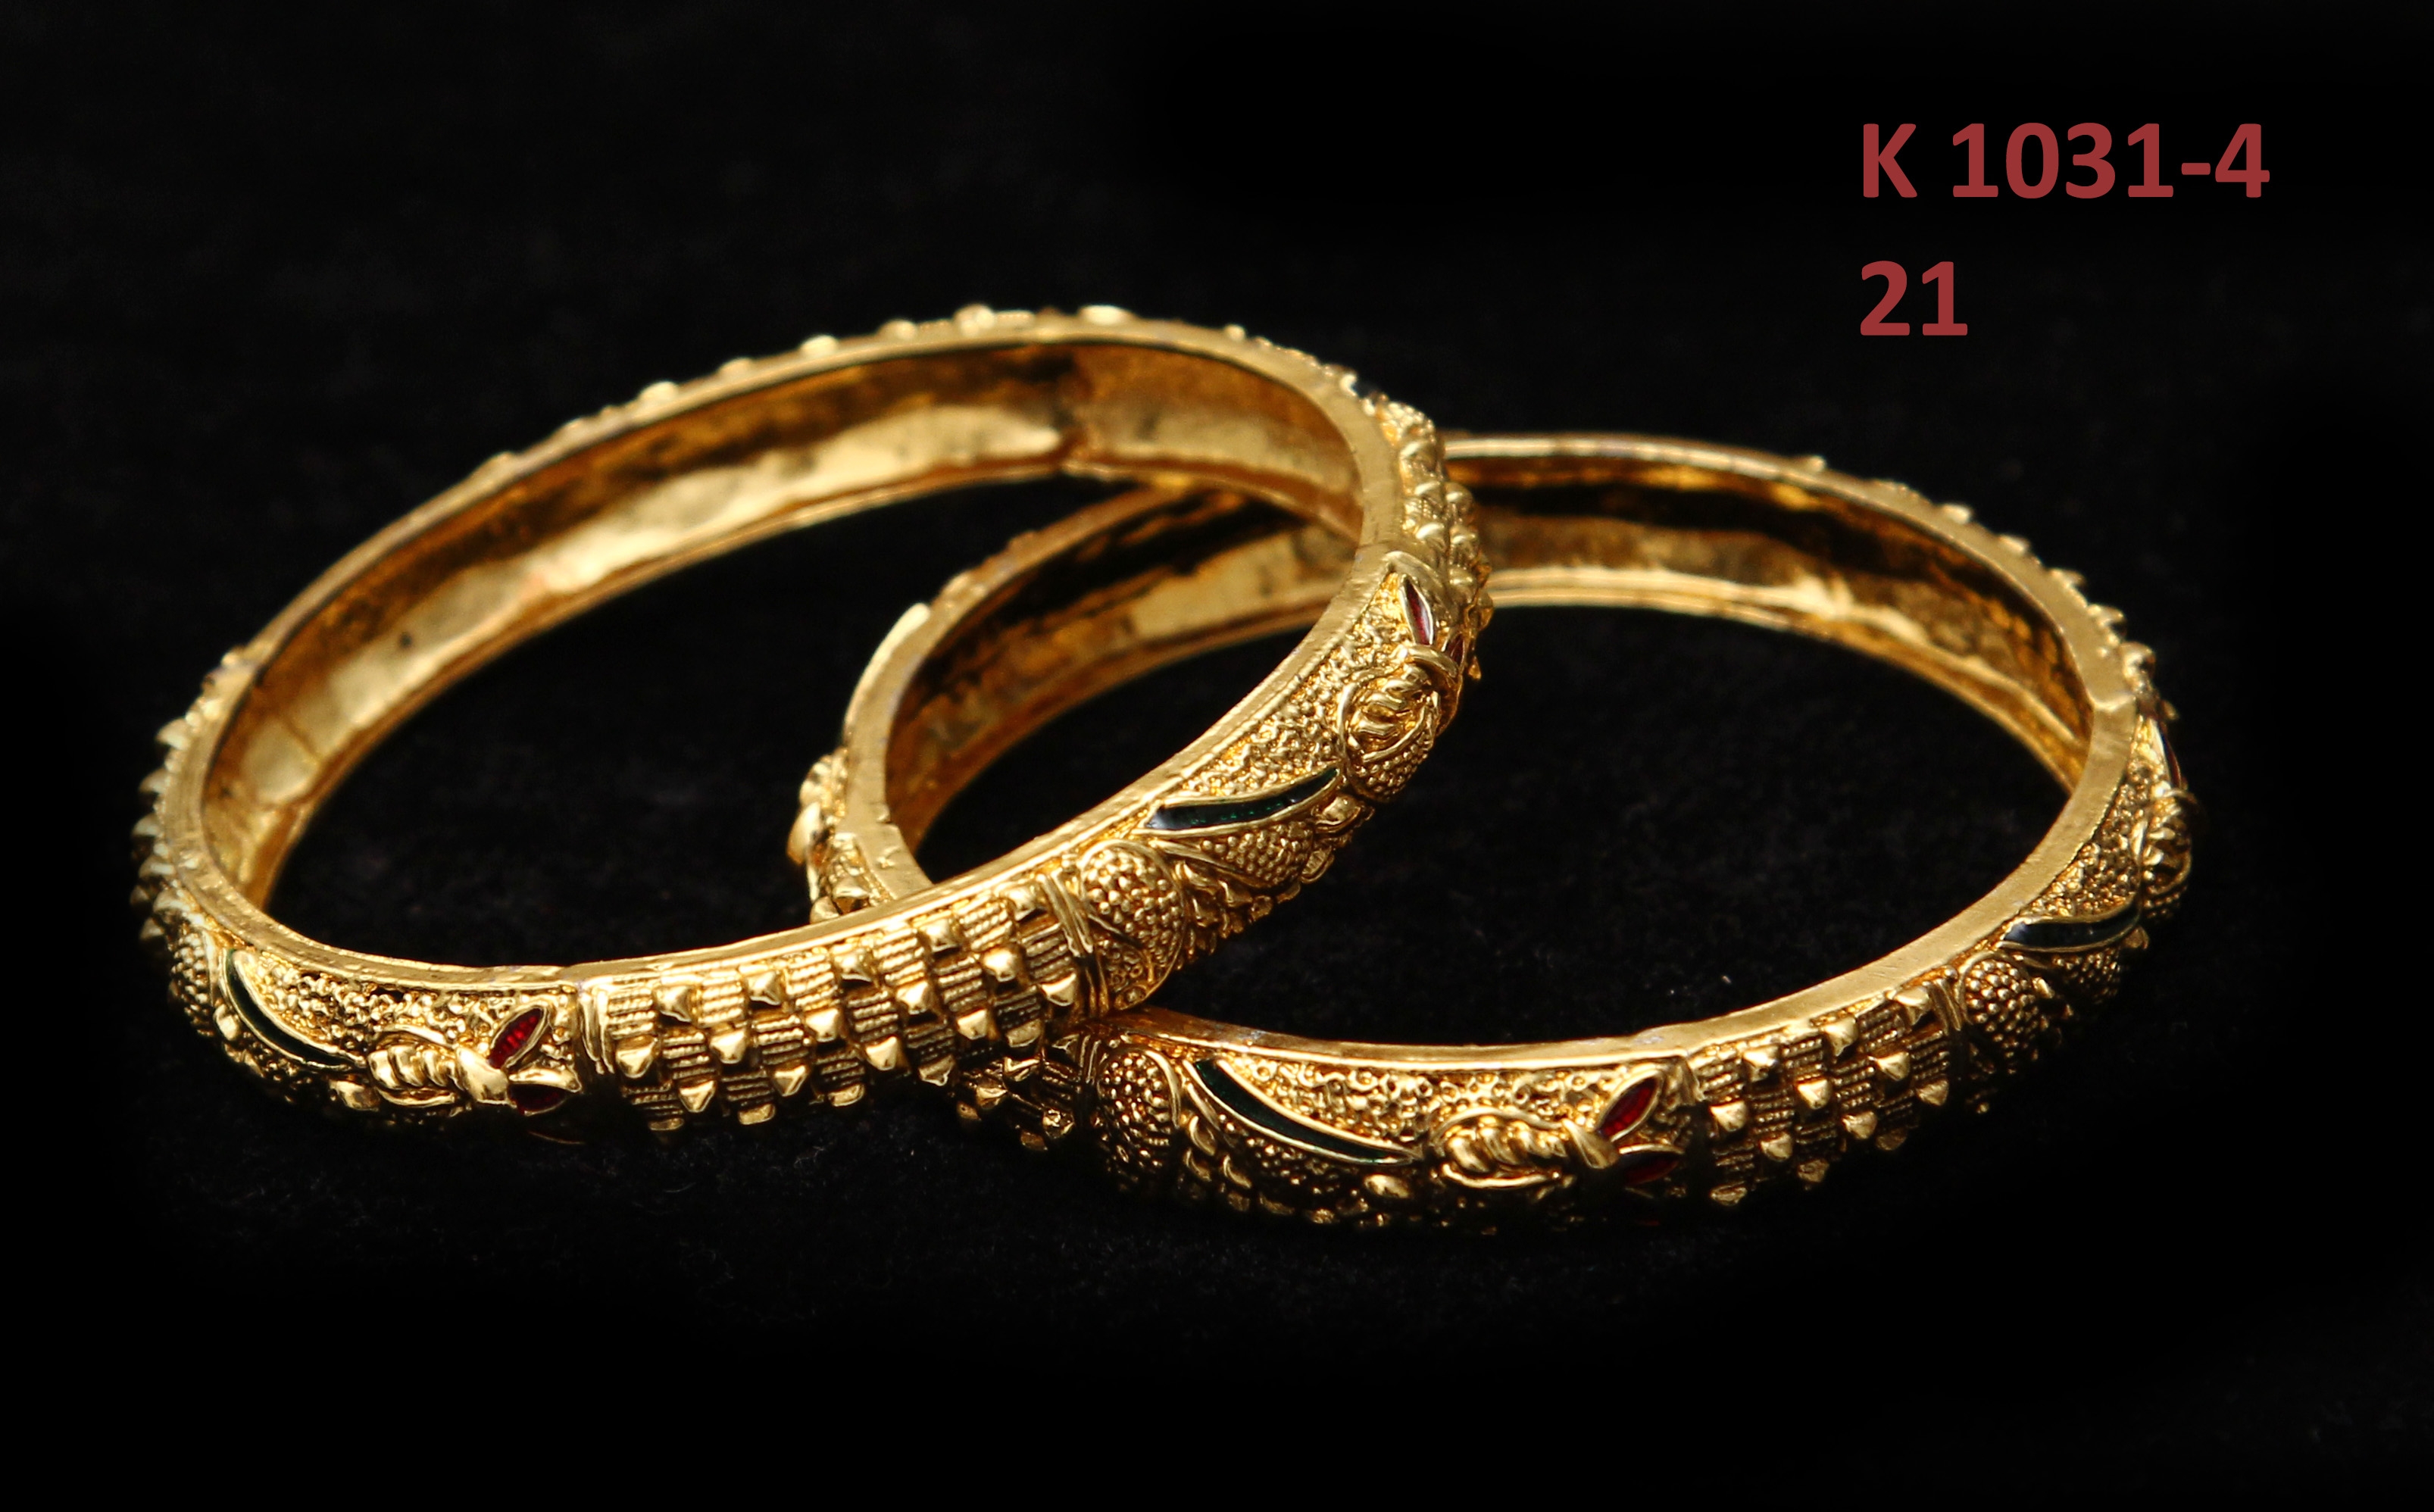 55Carat | 55Carat Traditional Jewellery Handcrafted jewellery Gold-Plated Bangle set of 2 For Womens and Girls